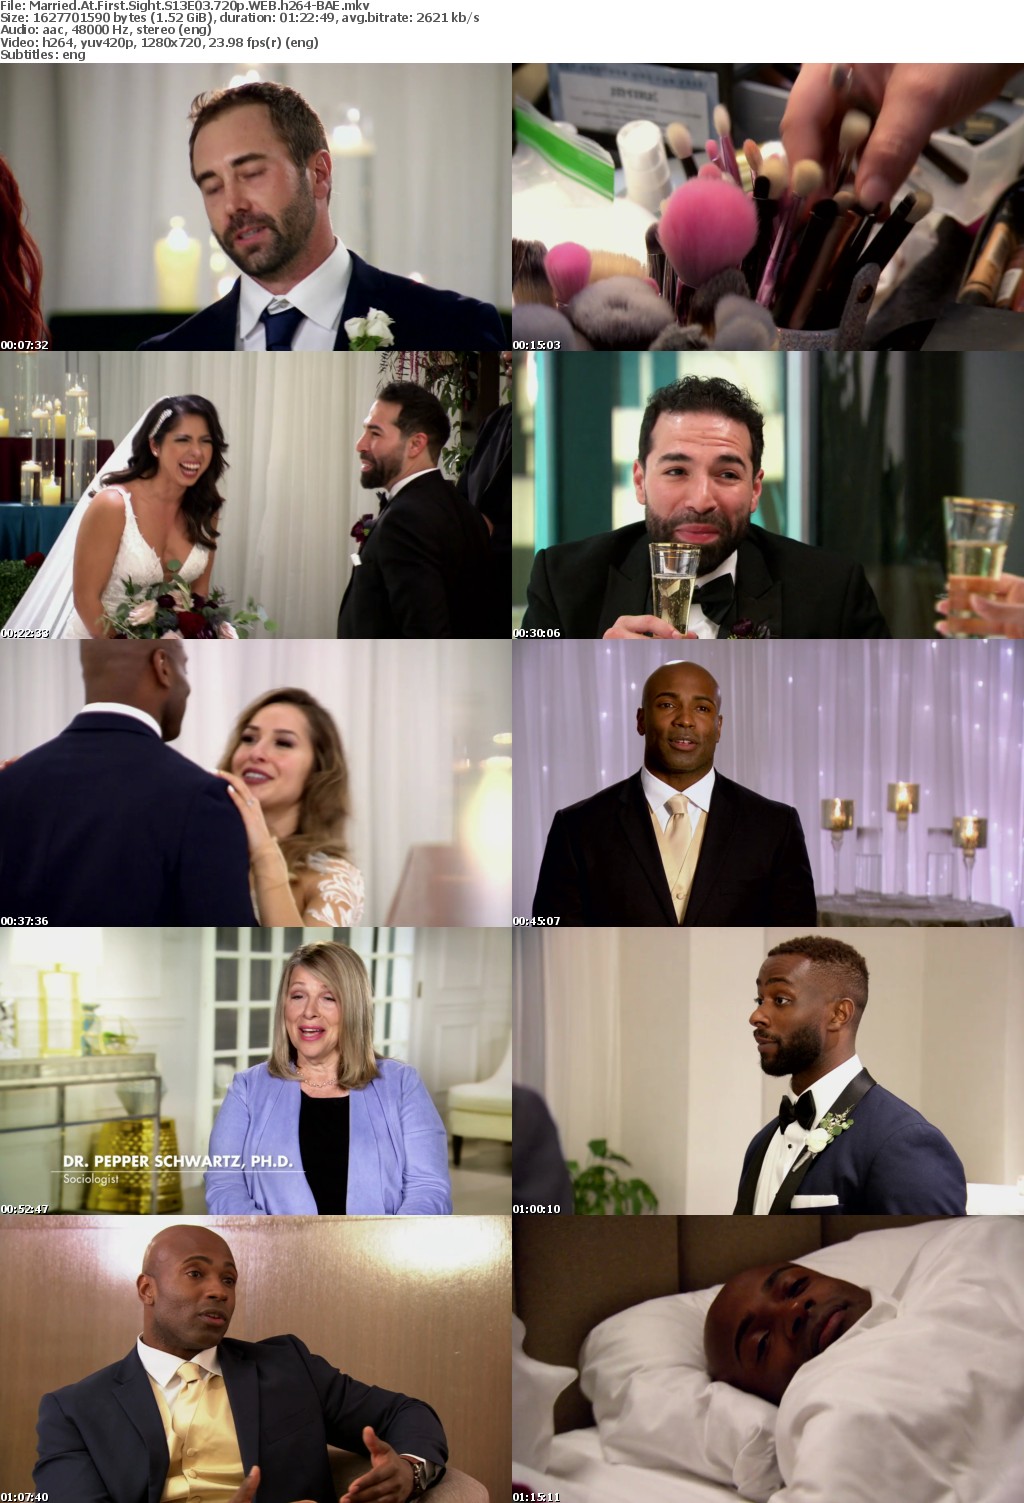 Married At First Sight S13E03 720p WEB h264-BAE